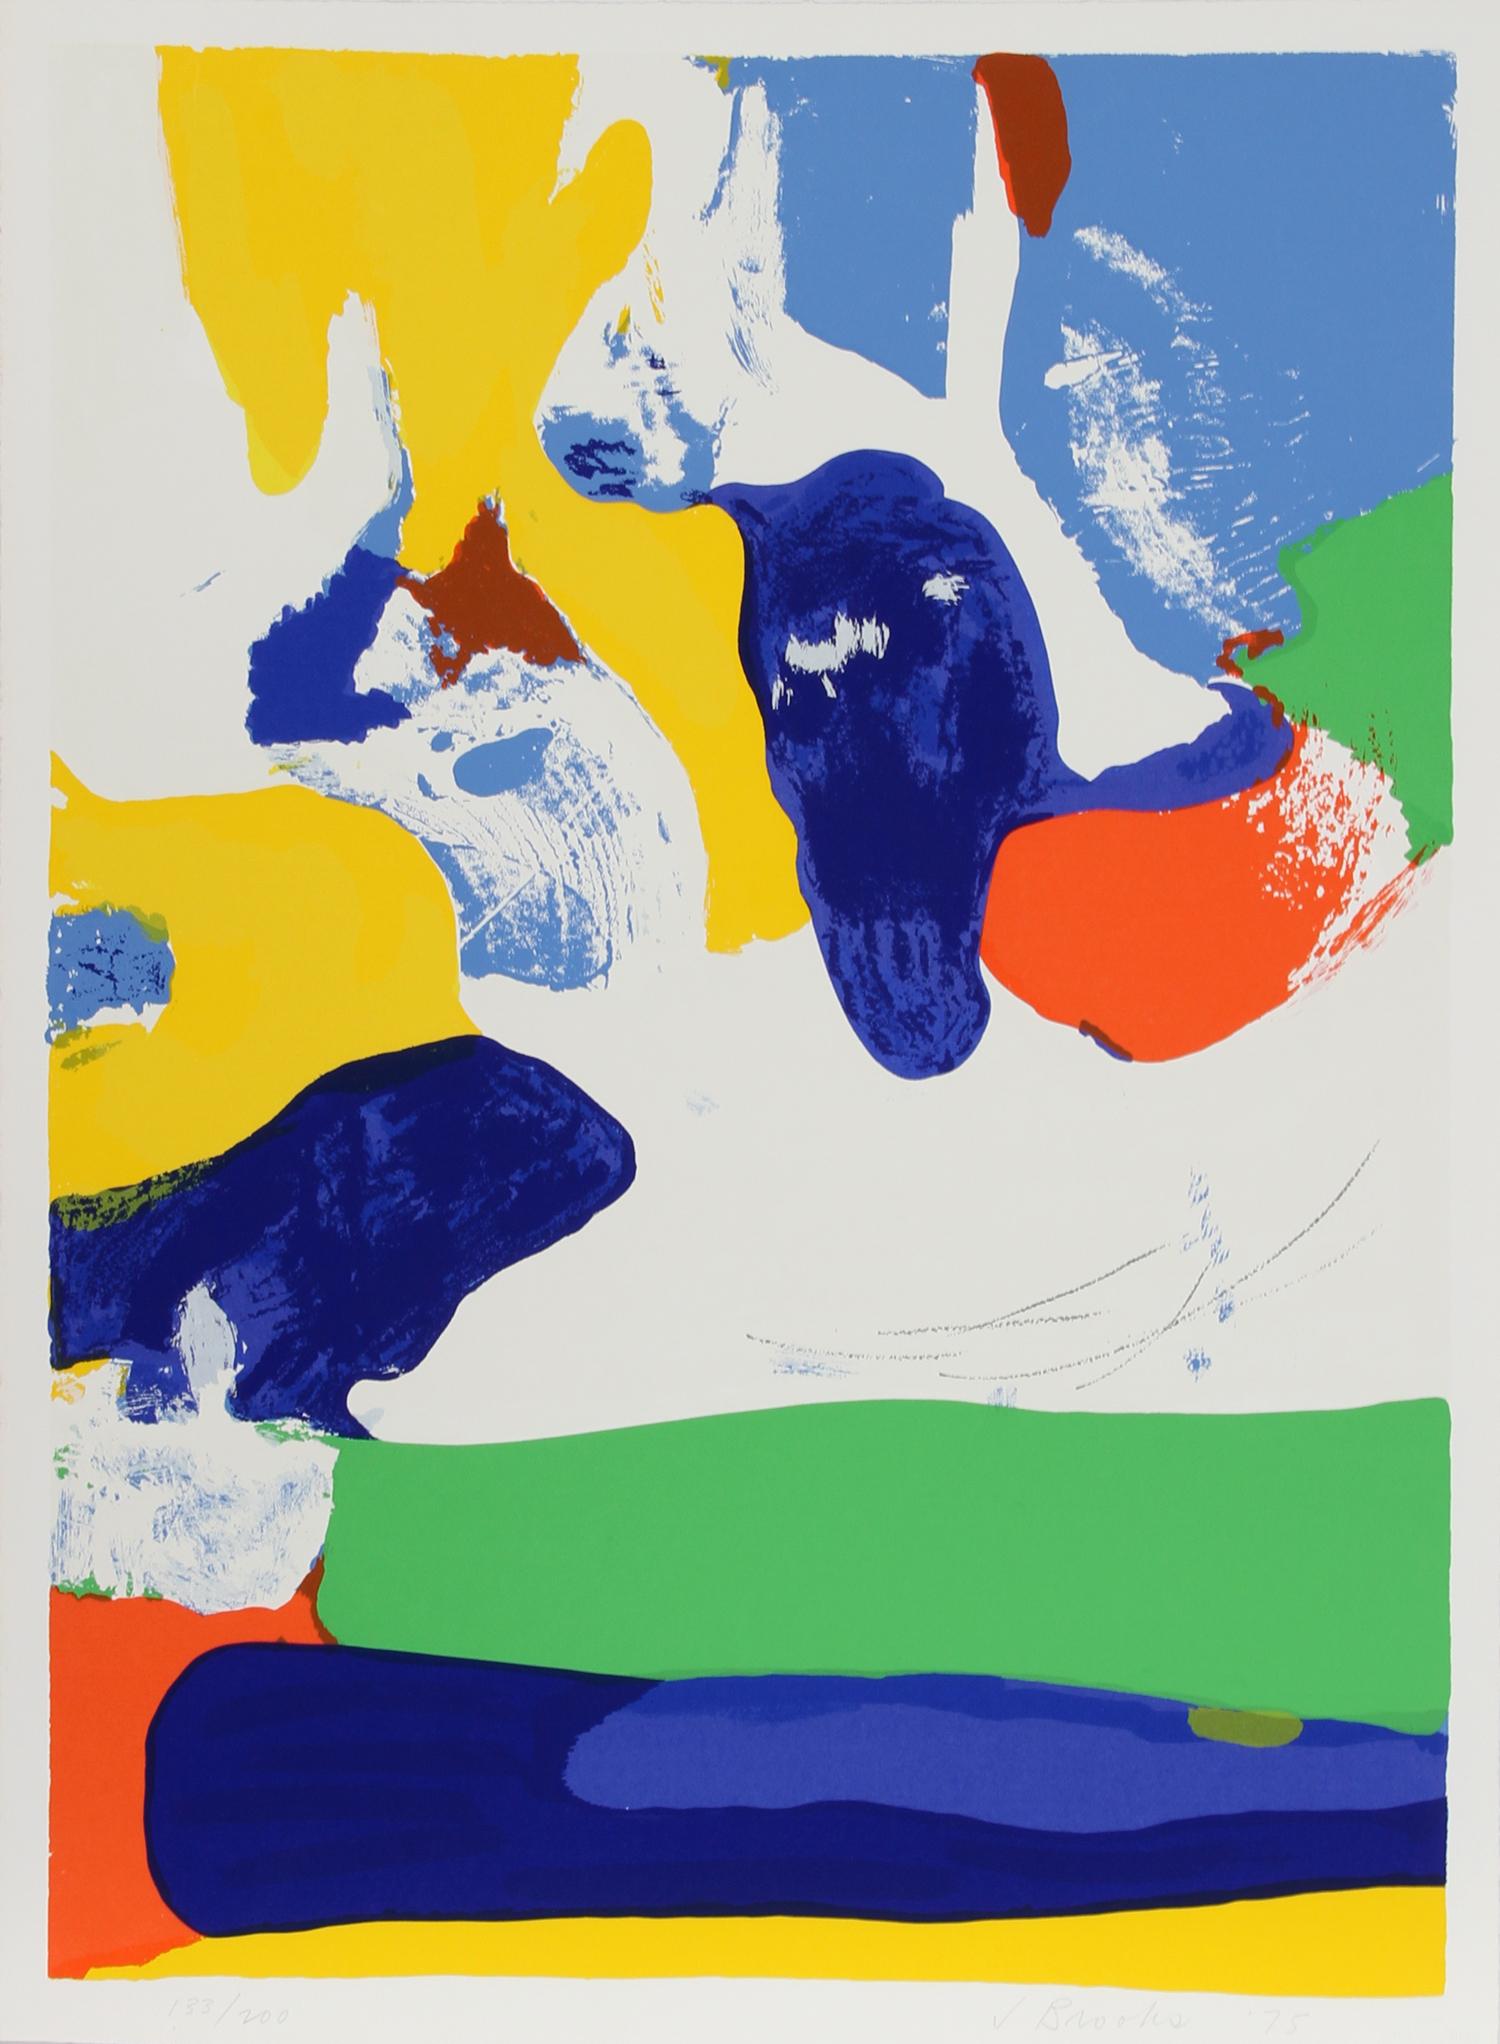 An abstract expressionist composition in bright and cheerful colors. Rather than opt for the moody and dark tone of other expressionists, this print uses almost youthful shades. The print is signed and numbered in pencil.

Concord
James Brooks,